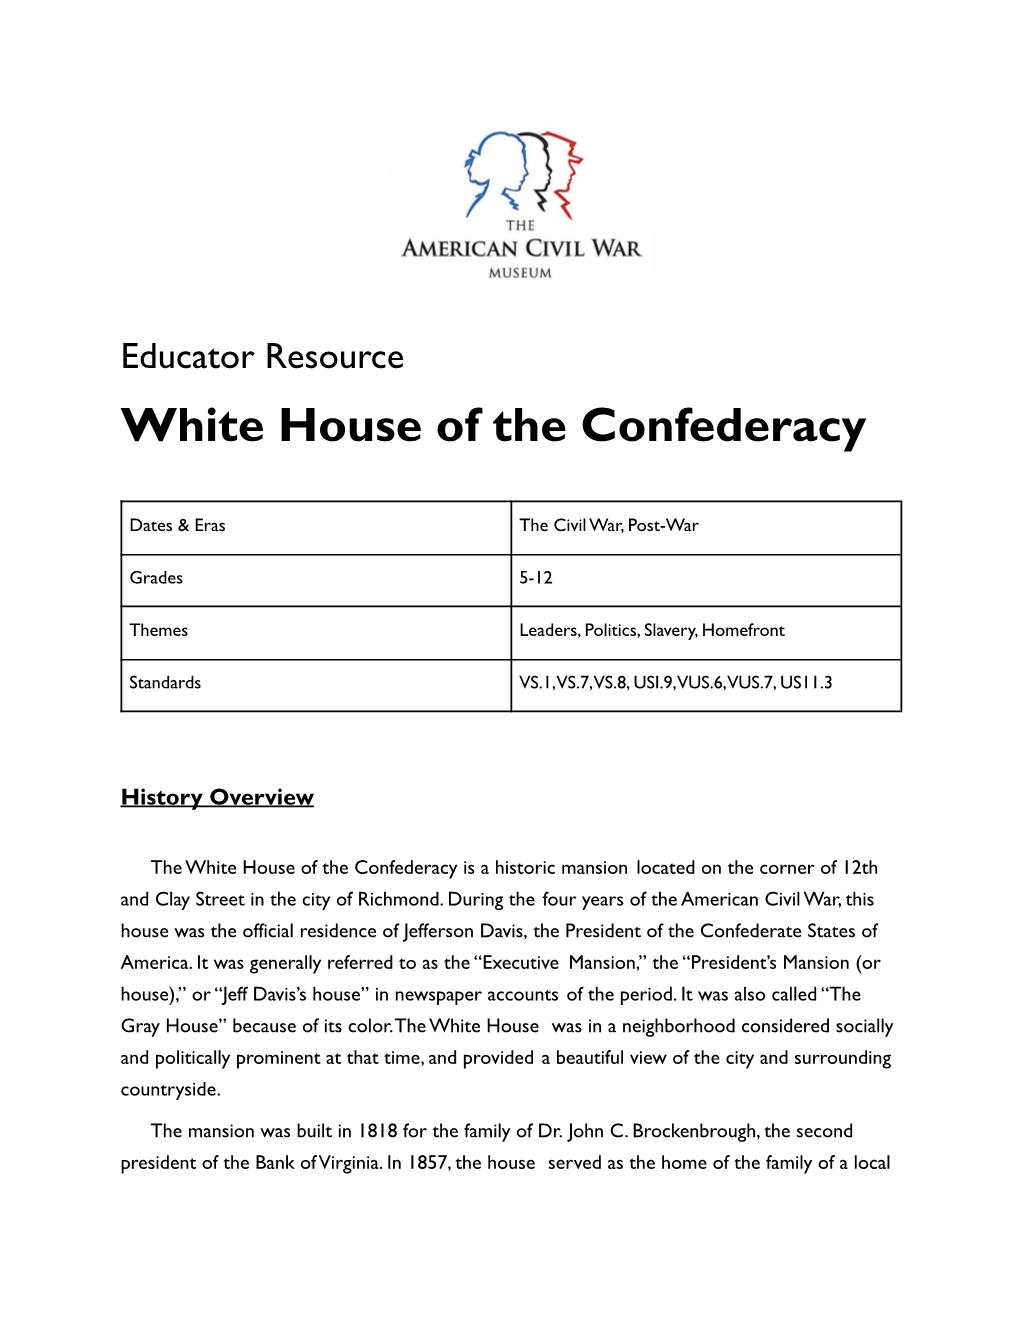 Educator Resource White House of the Confederacy